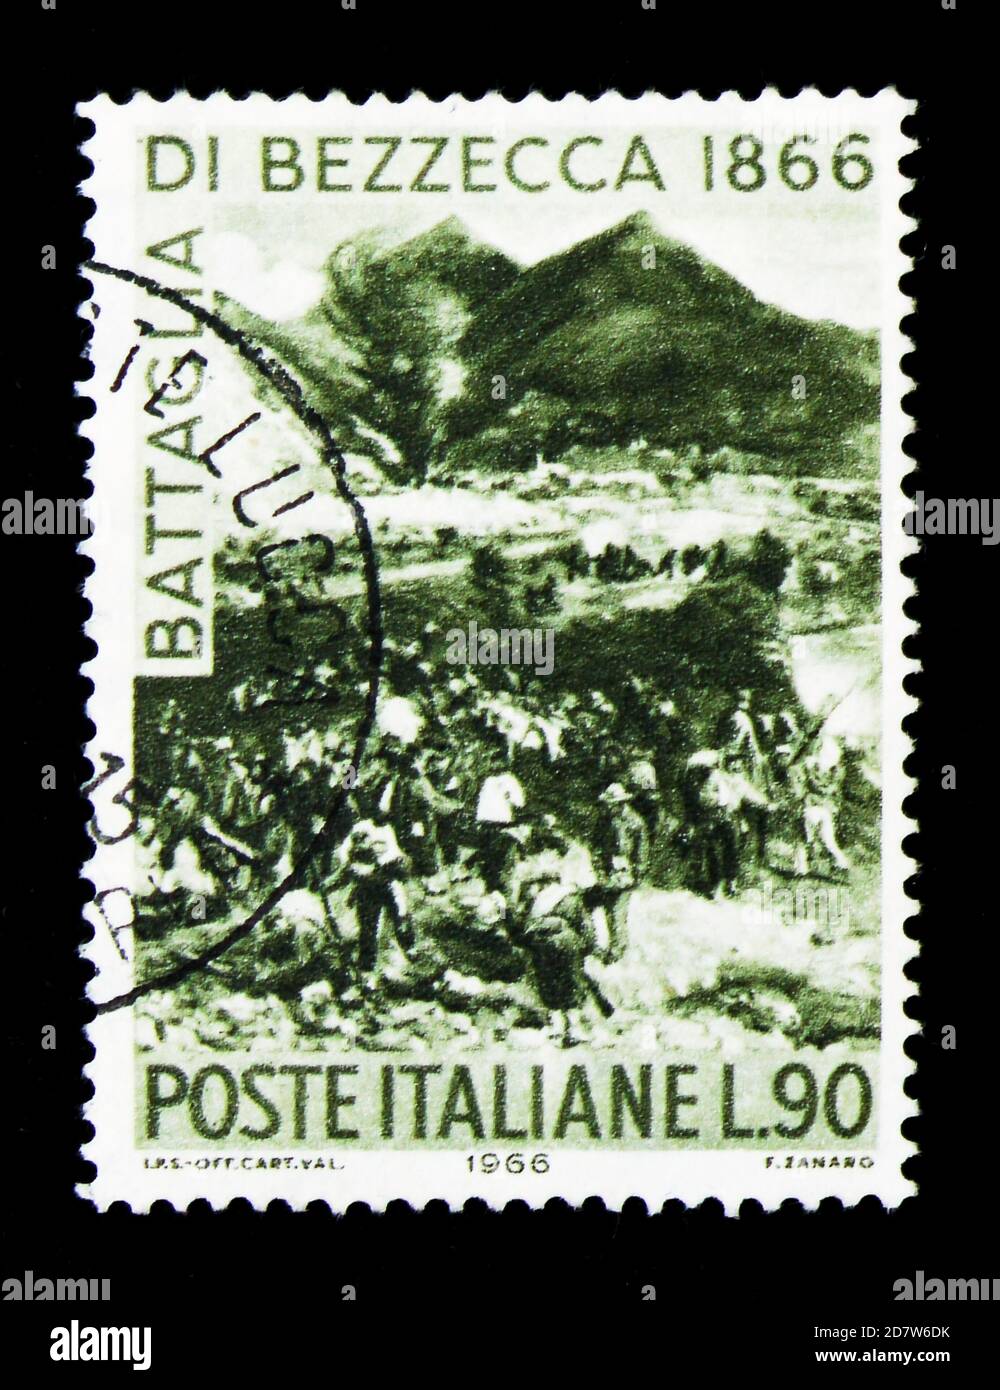 MOSCOW, RUSSIA - APRIL 15, 2018: A stamp printed in Italy shows Battle of Bezzecca, Centenary of the Battle of Bezzecca serie, circa 1966 Stock Photo